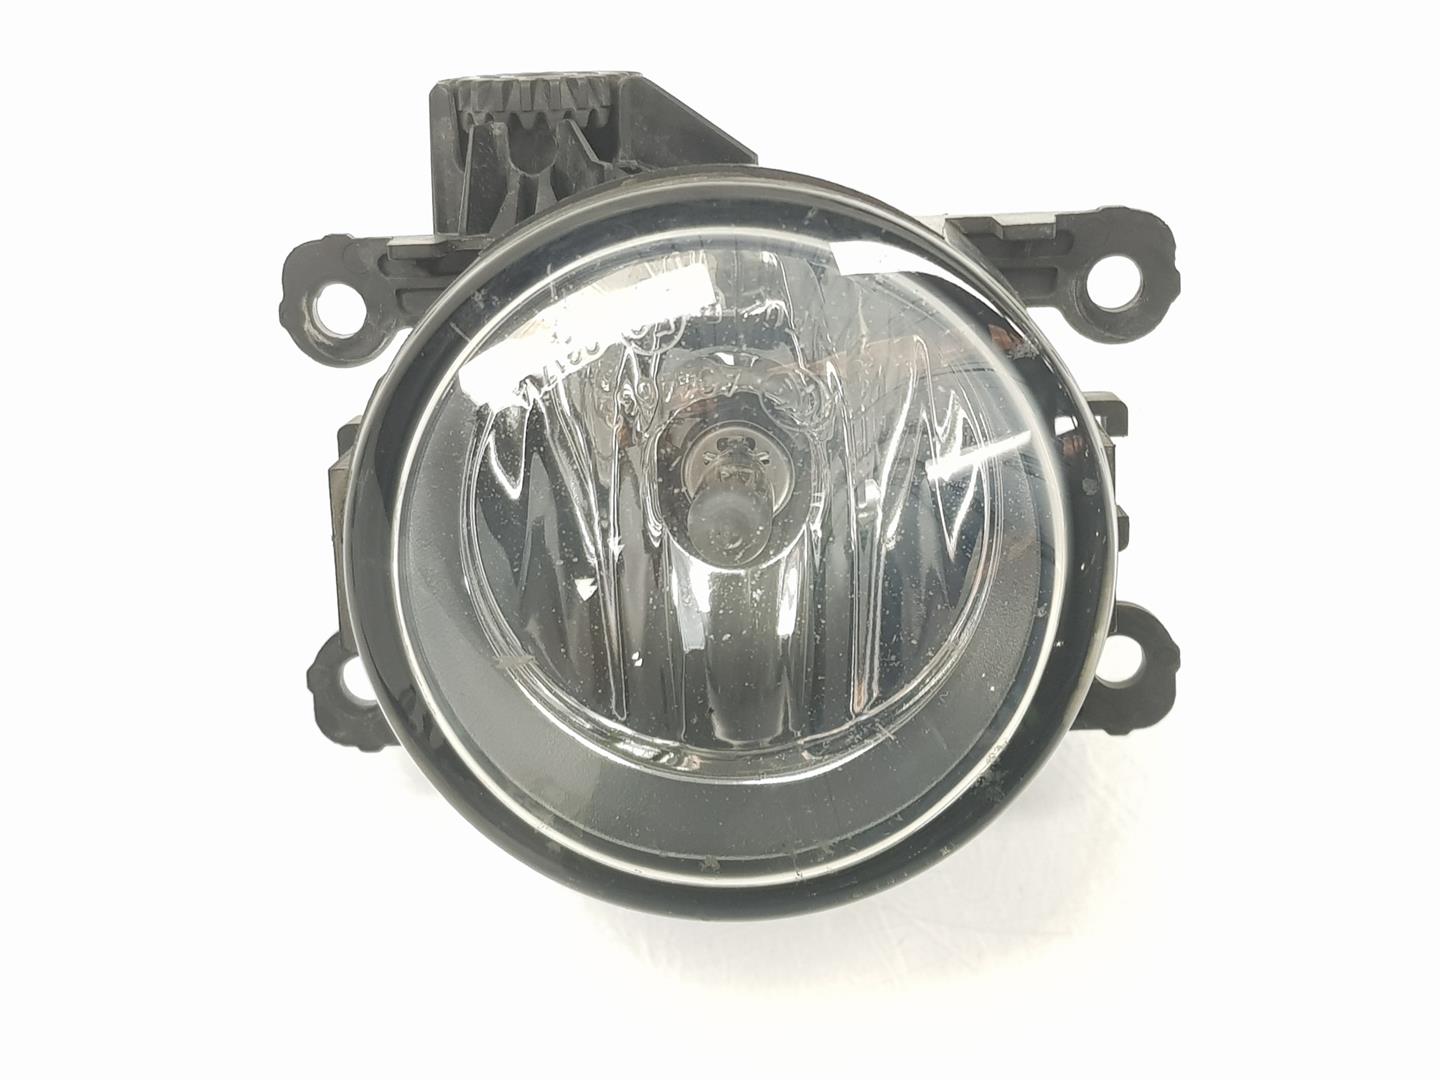 LAND ROVER Discovery 4 generation (2009-2016) Front Left Fog Light LR001587, 6H5215K201AA 21694100